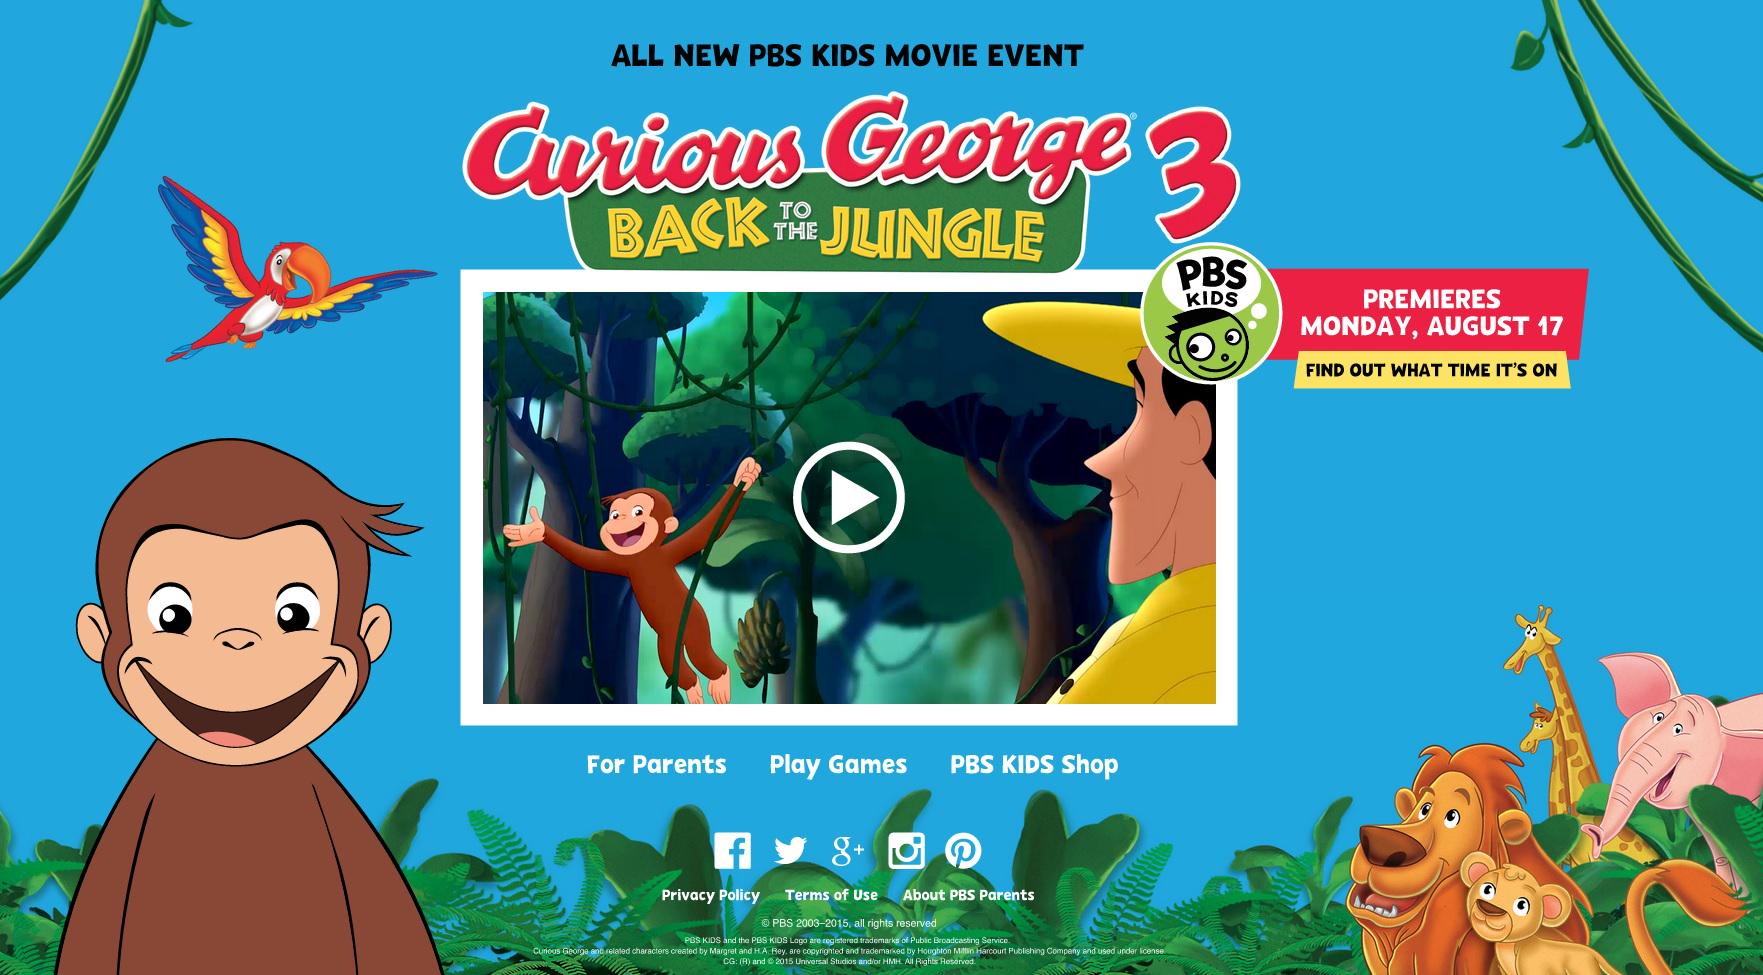 PBS KIDS on X: Here's a SNEAK PEEK of #CuriousGeorge 3: Back to